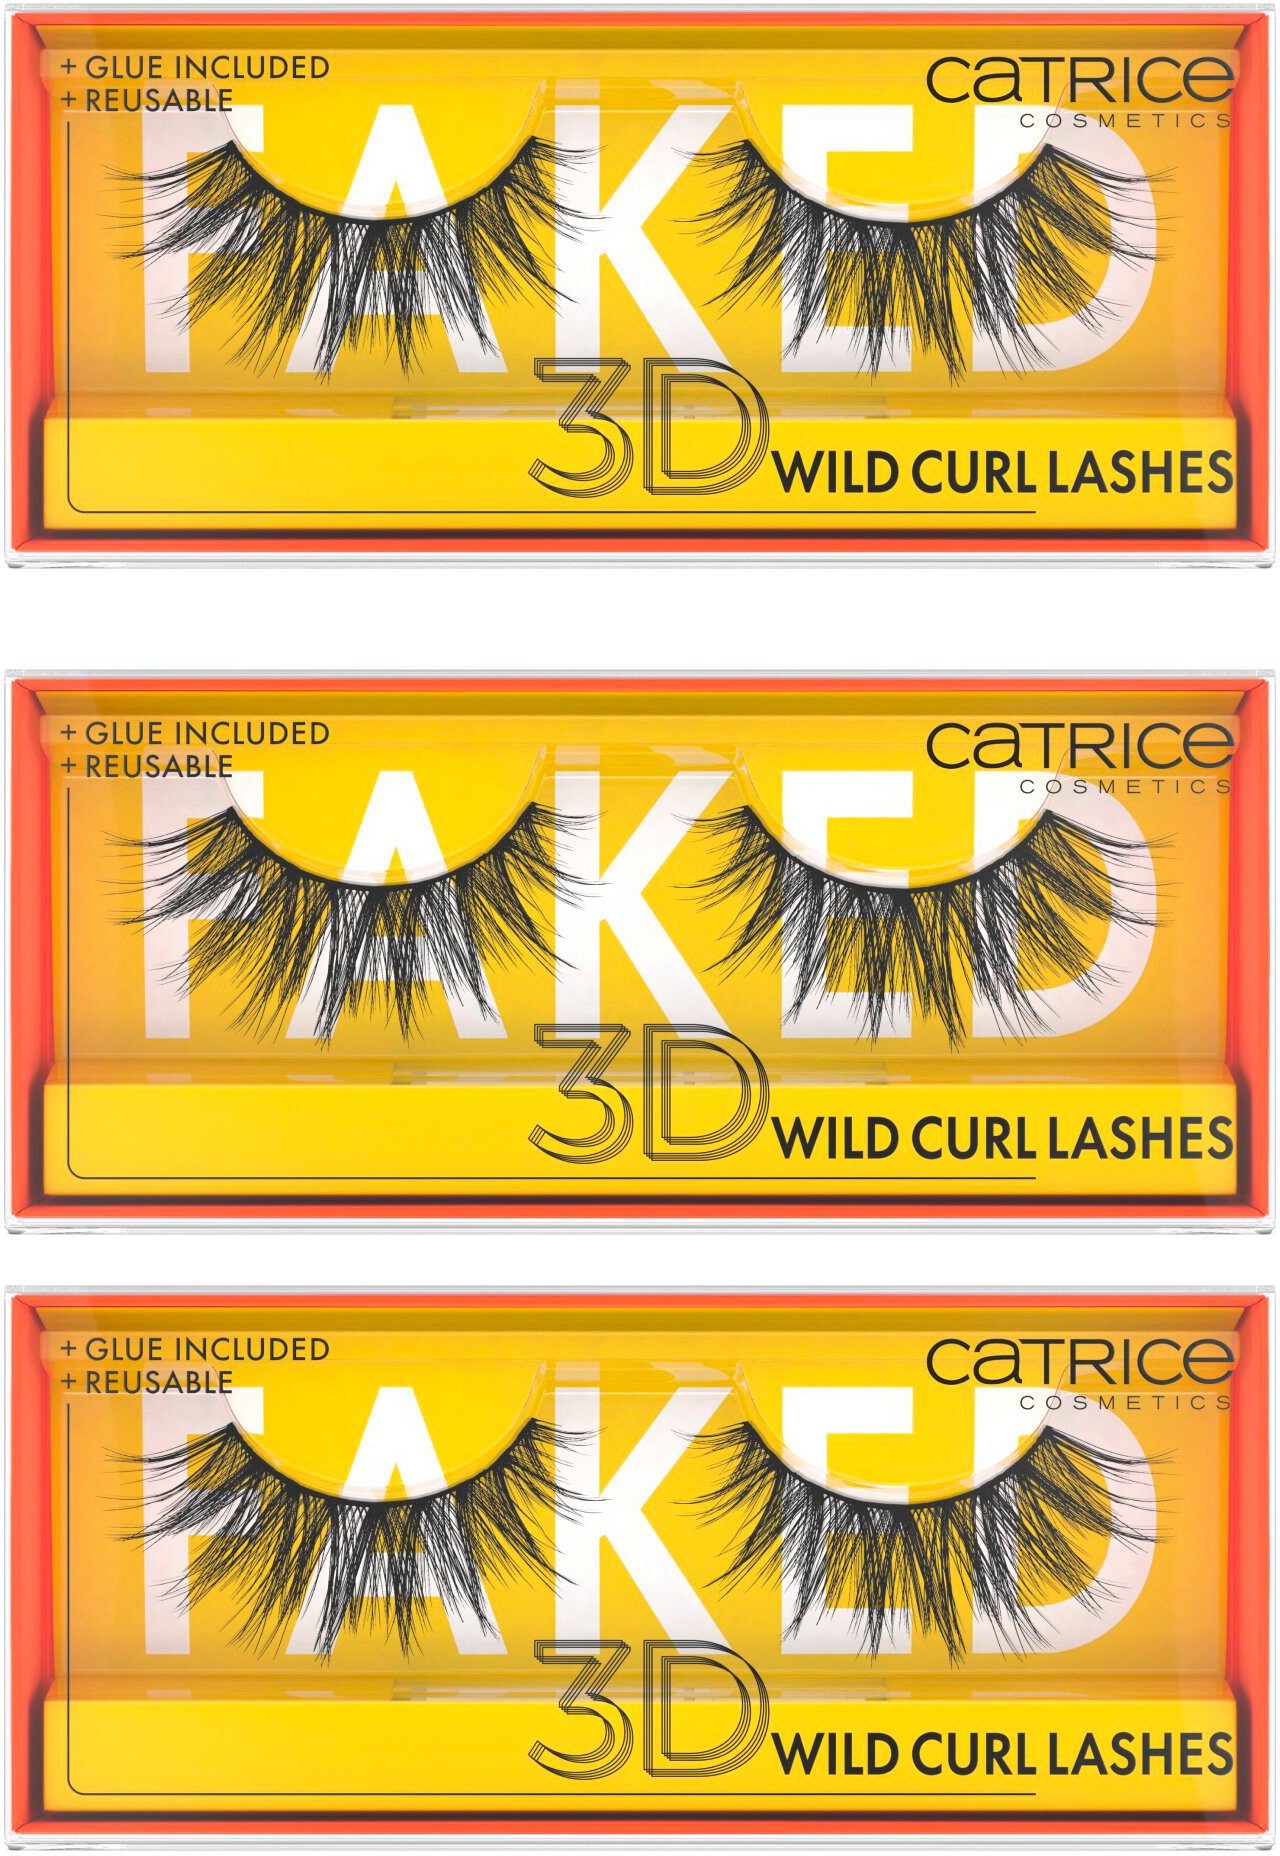 Set, Lashes, Faked 3 Catrice Wild Bandwimpern Curl 3D